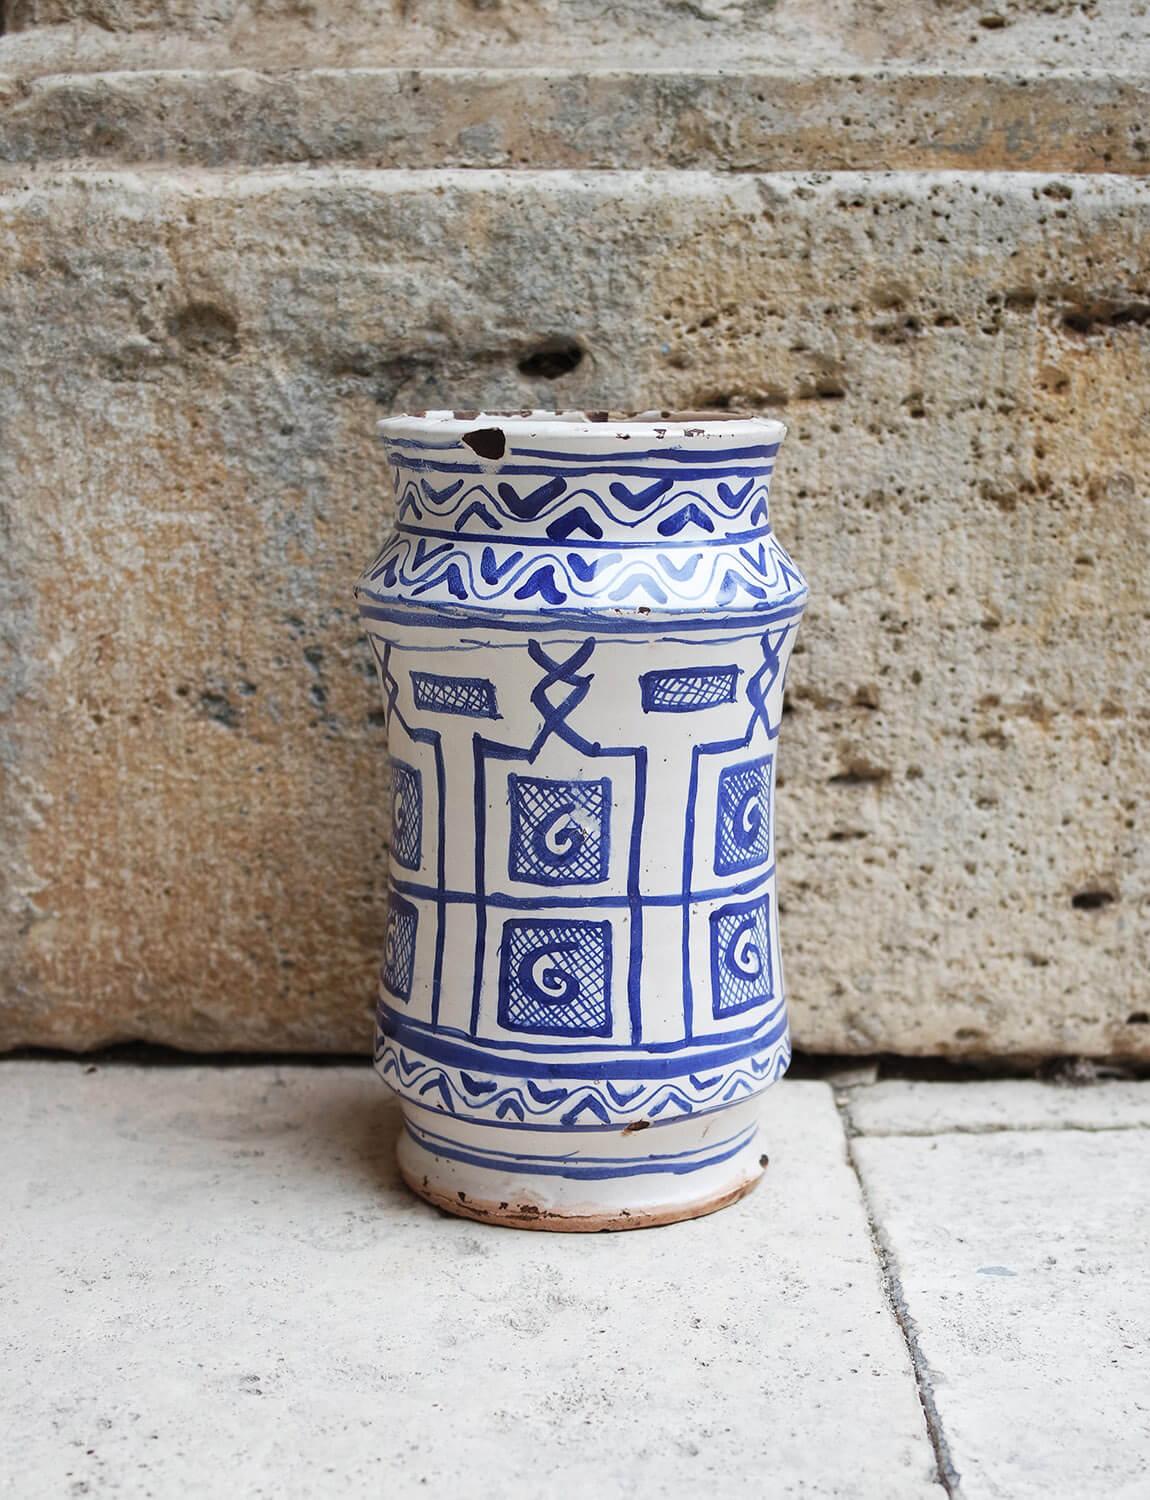 A beautiful blue and white Maiolica patterned Italian Albarello, late 1800s early 1900s. Found in Palazzo Torlogna in Rome. Albarelli were ancient storage containers often used in old pharmacies and shops. Their unique shape was designed to fit with